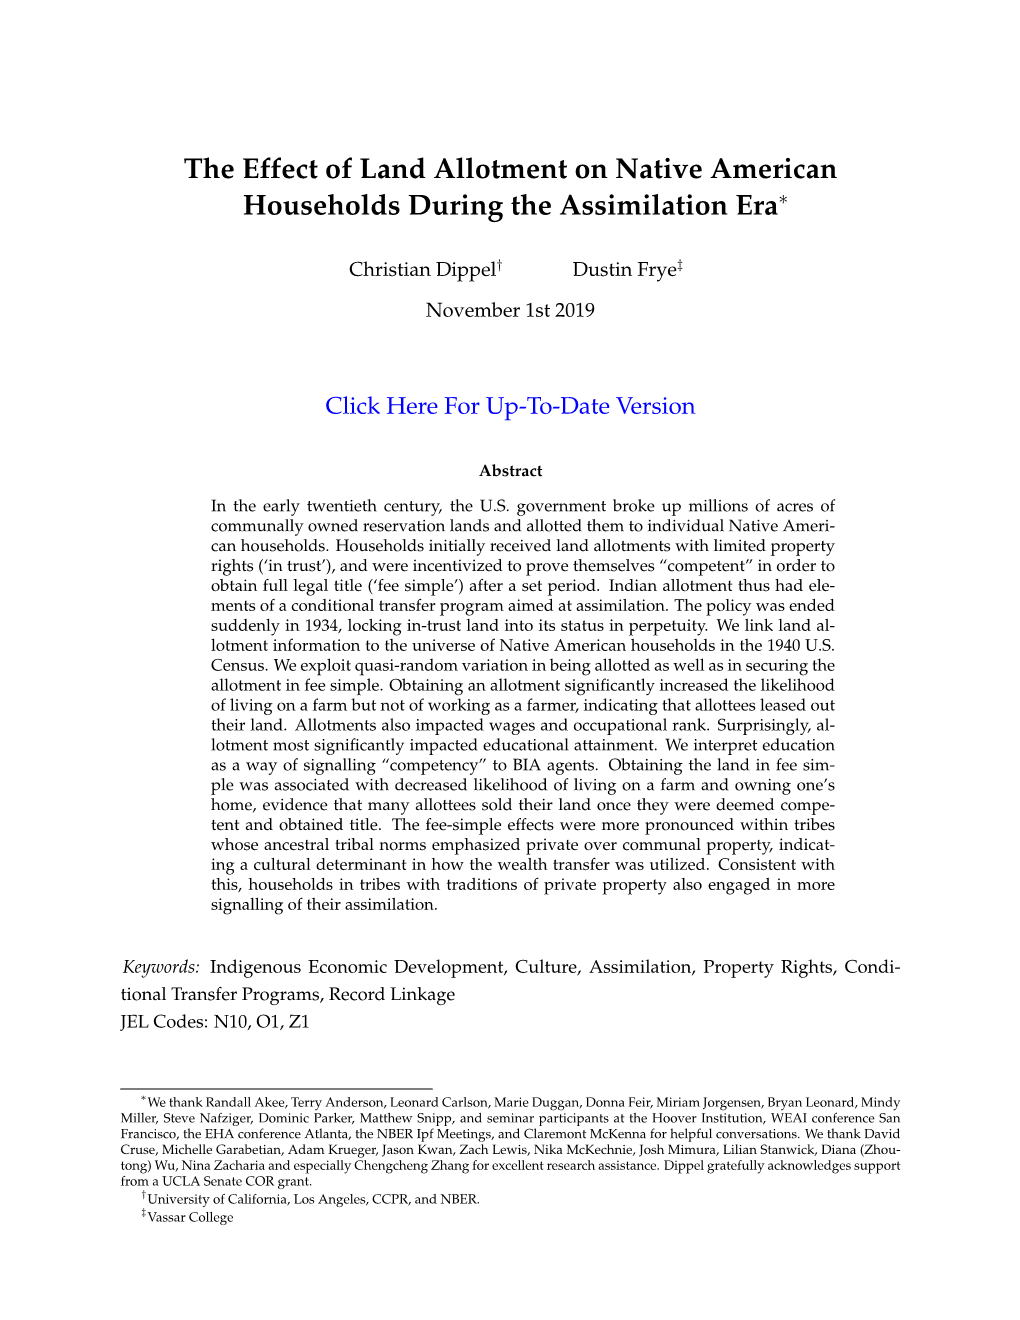 The Effect of Land Allotment on Native American Households During the Assimilation Era∗